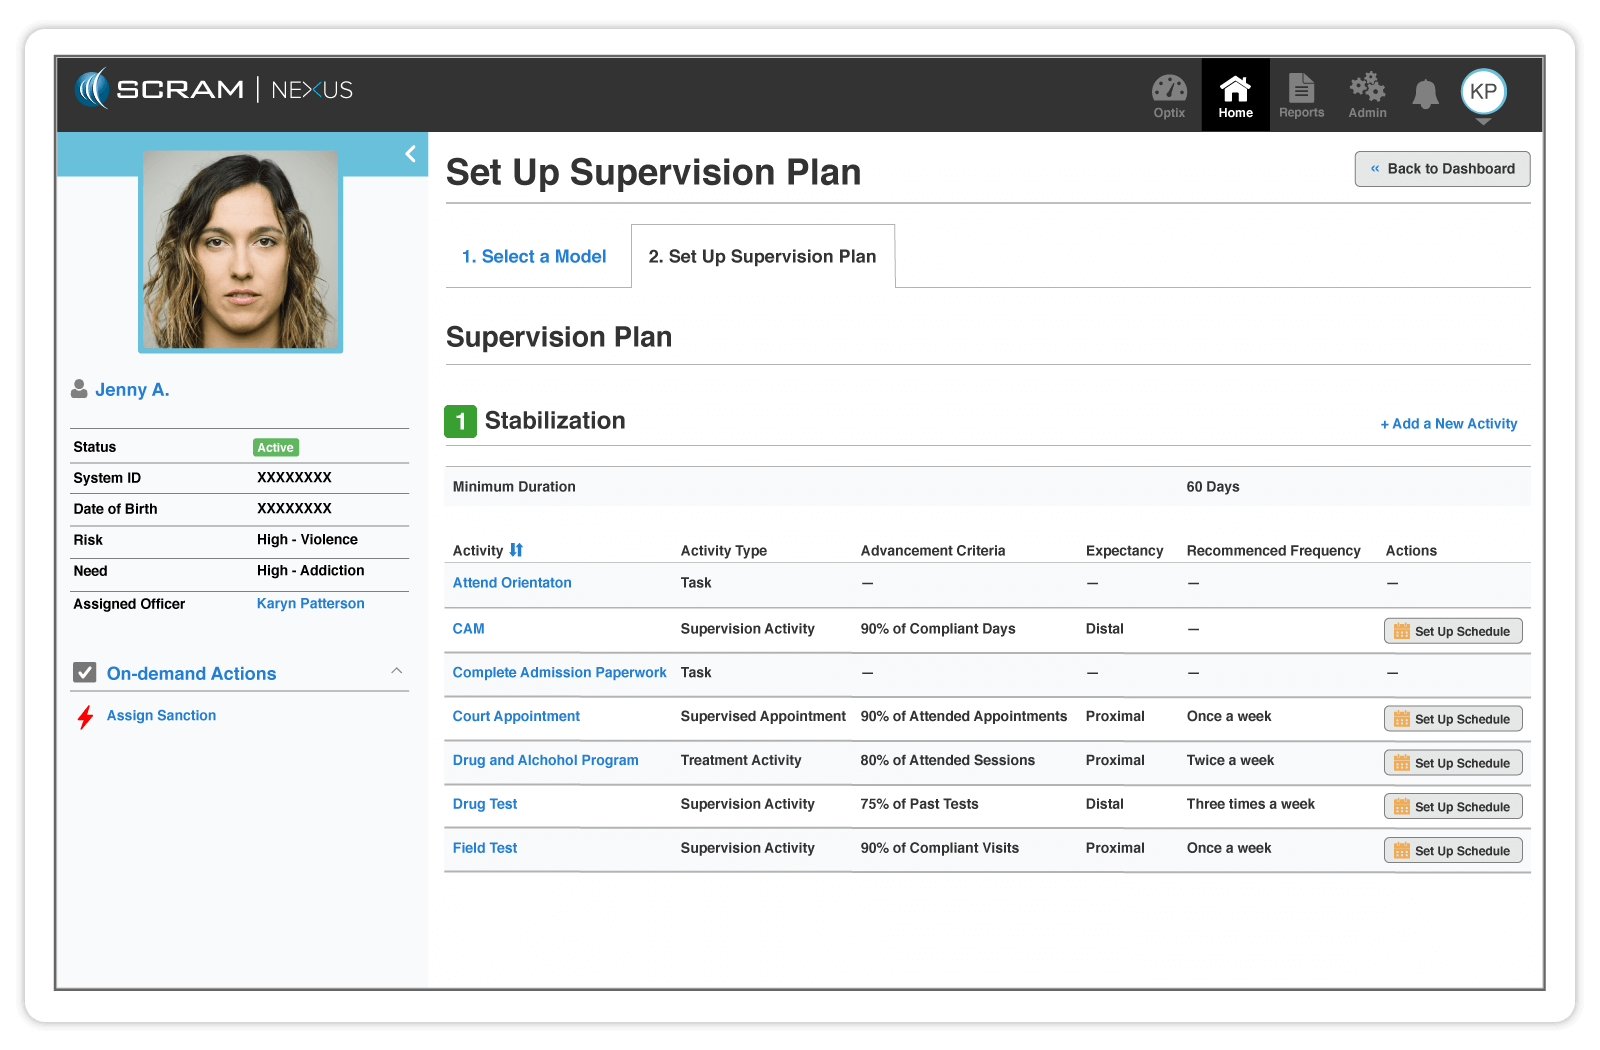 SCRAM Nexus compiles client data to automatically create evidence-based supervision plans.